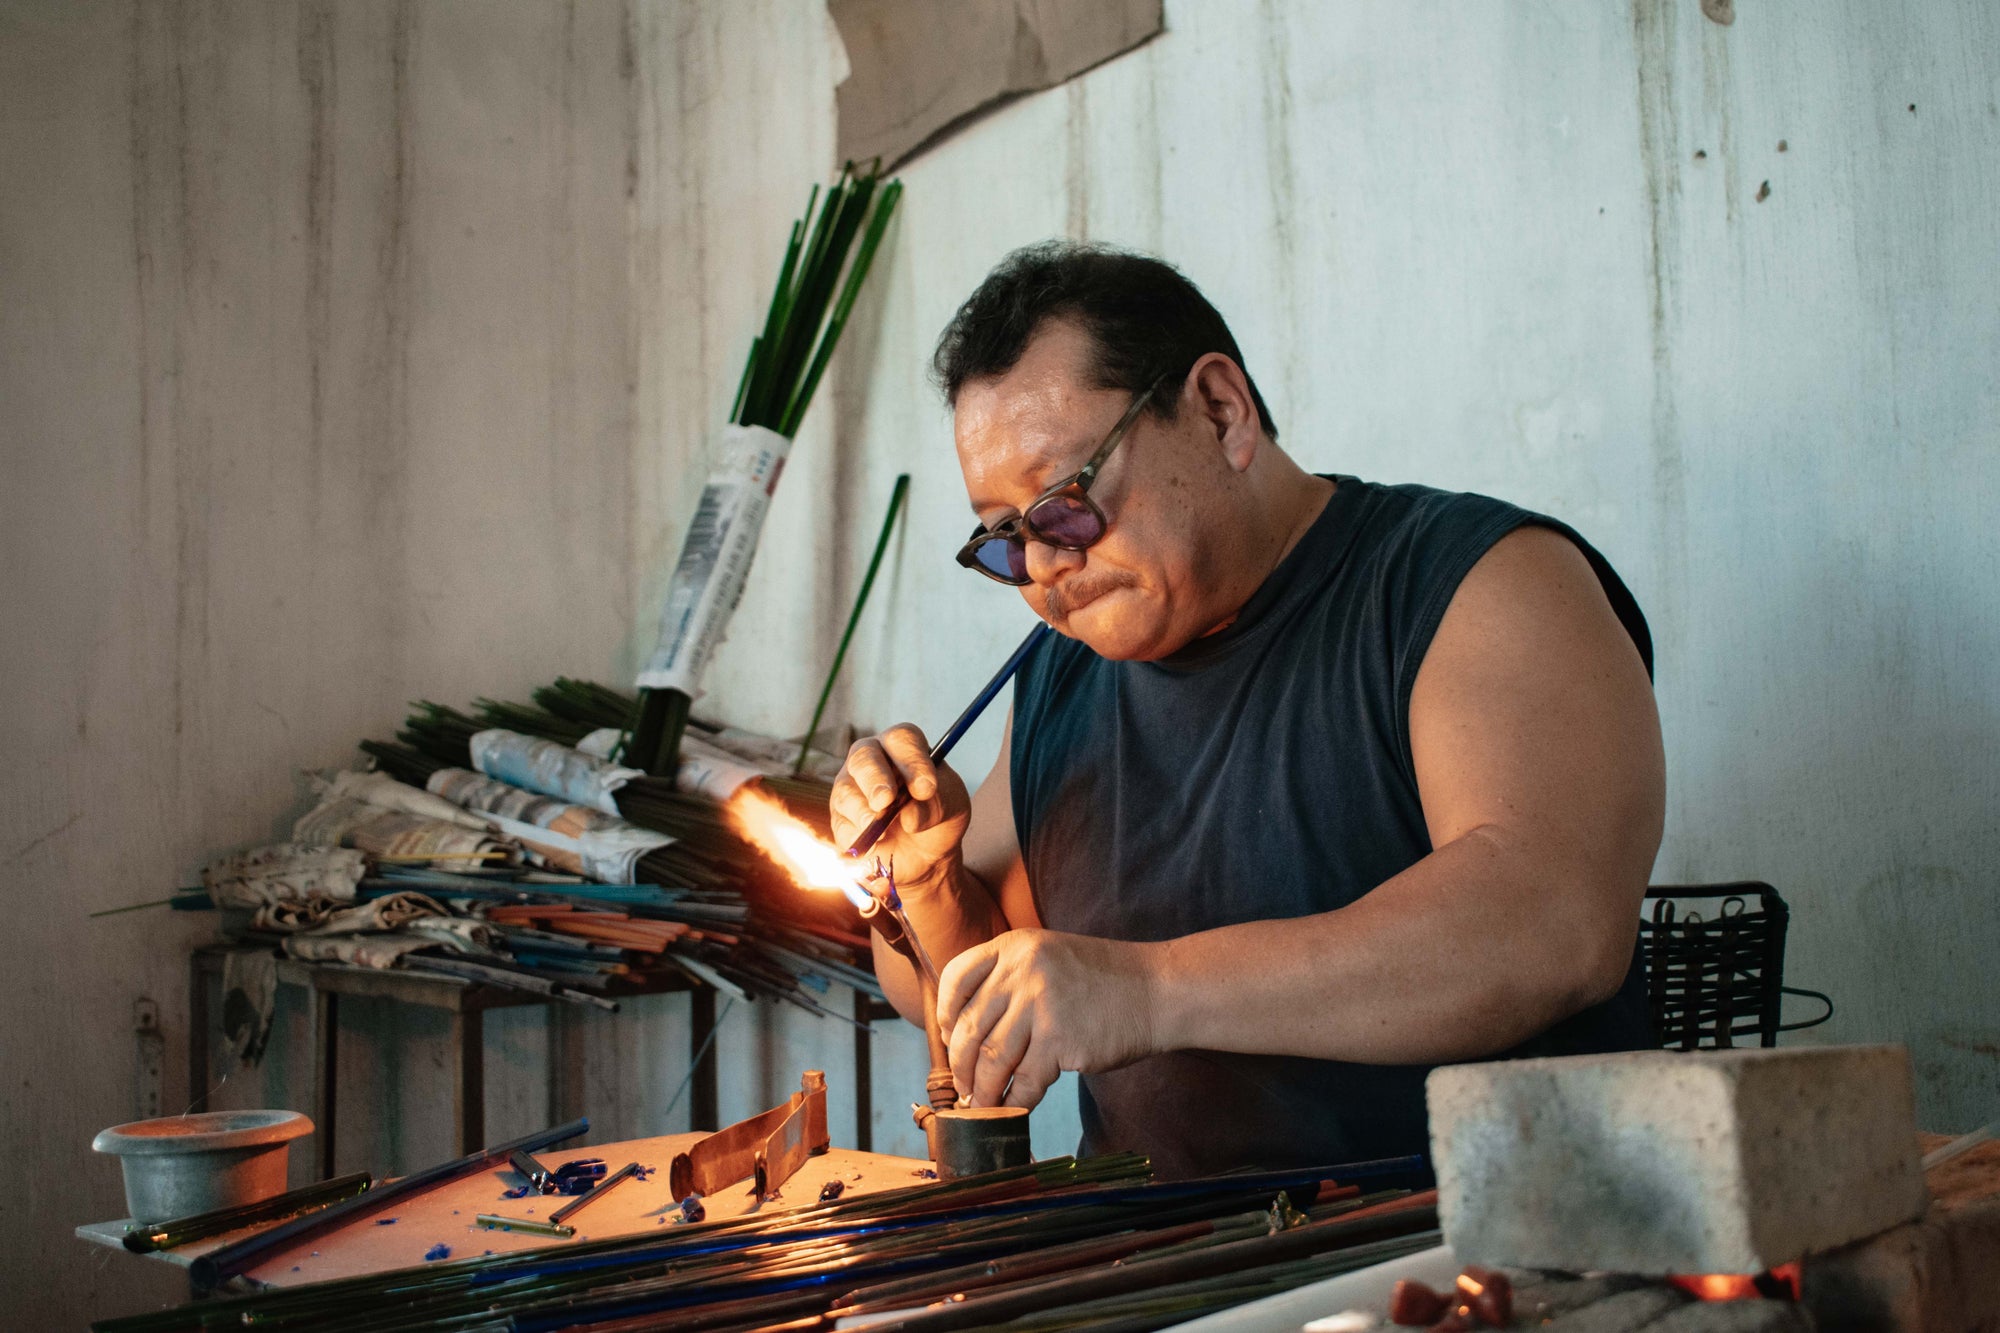 A male, Mexican national in a blue tank top with protective glasses on blows a large flaming on a workdesk to heat up a piece of pigmented 